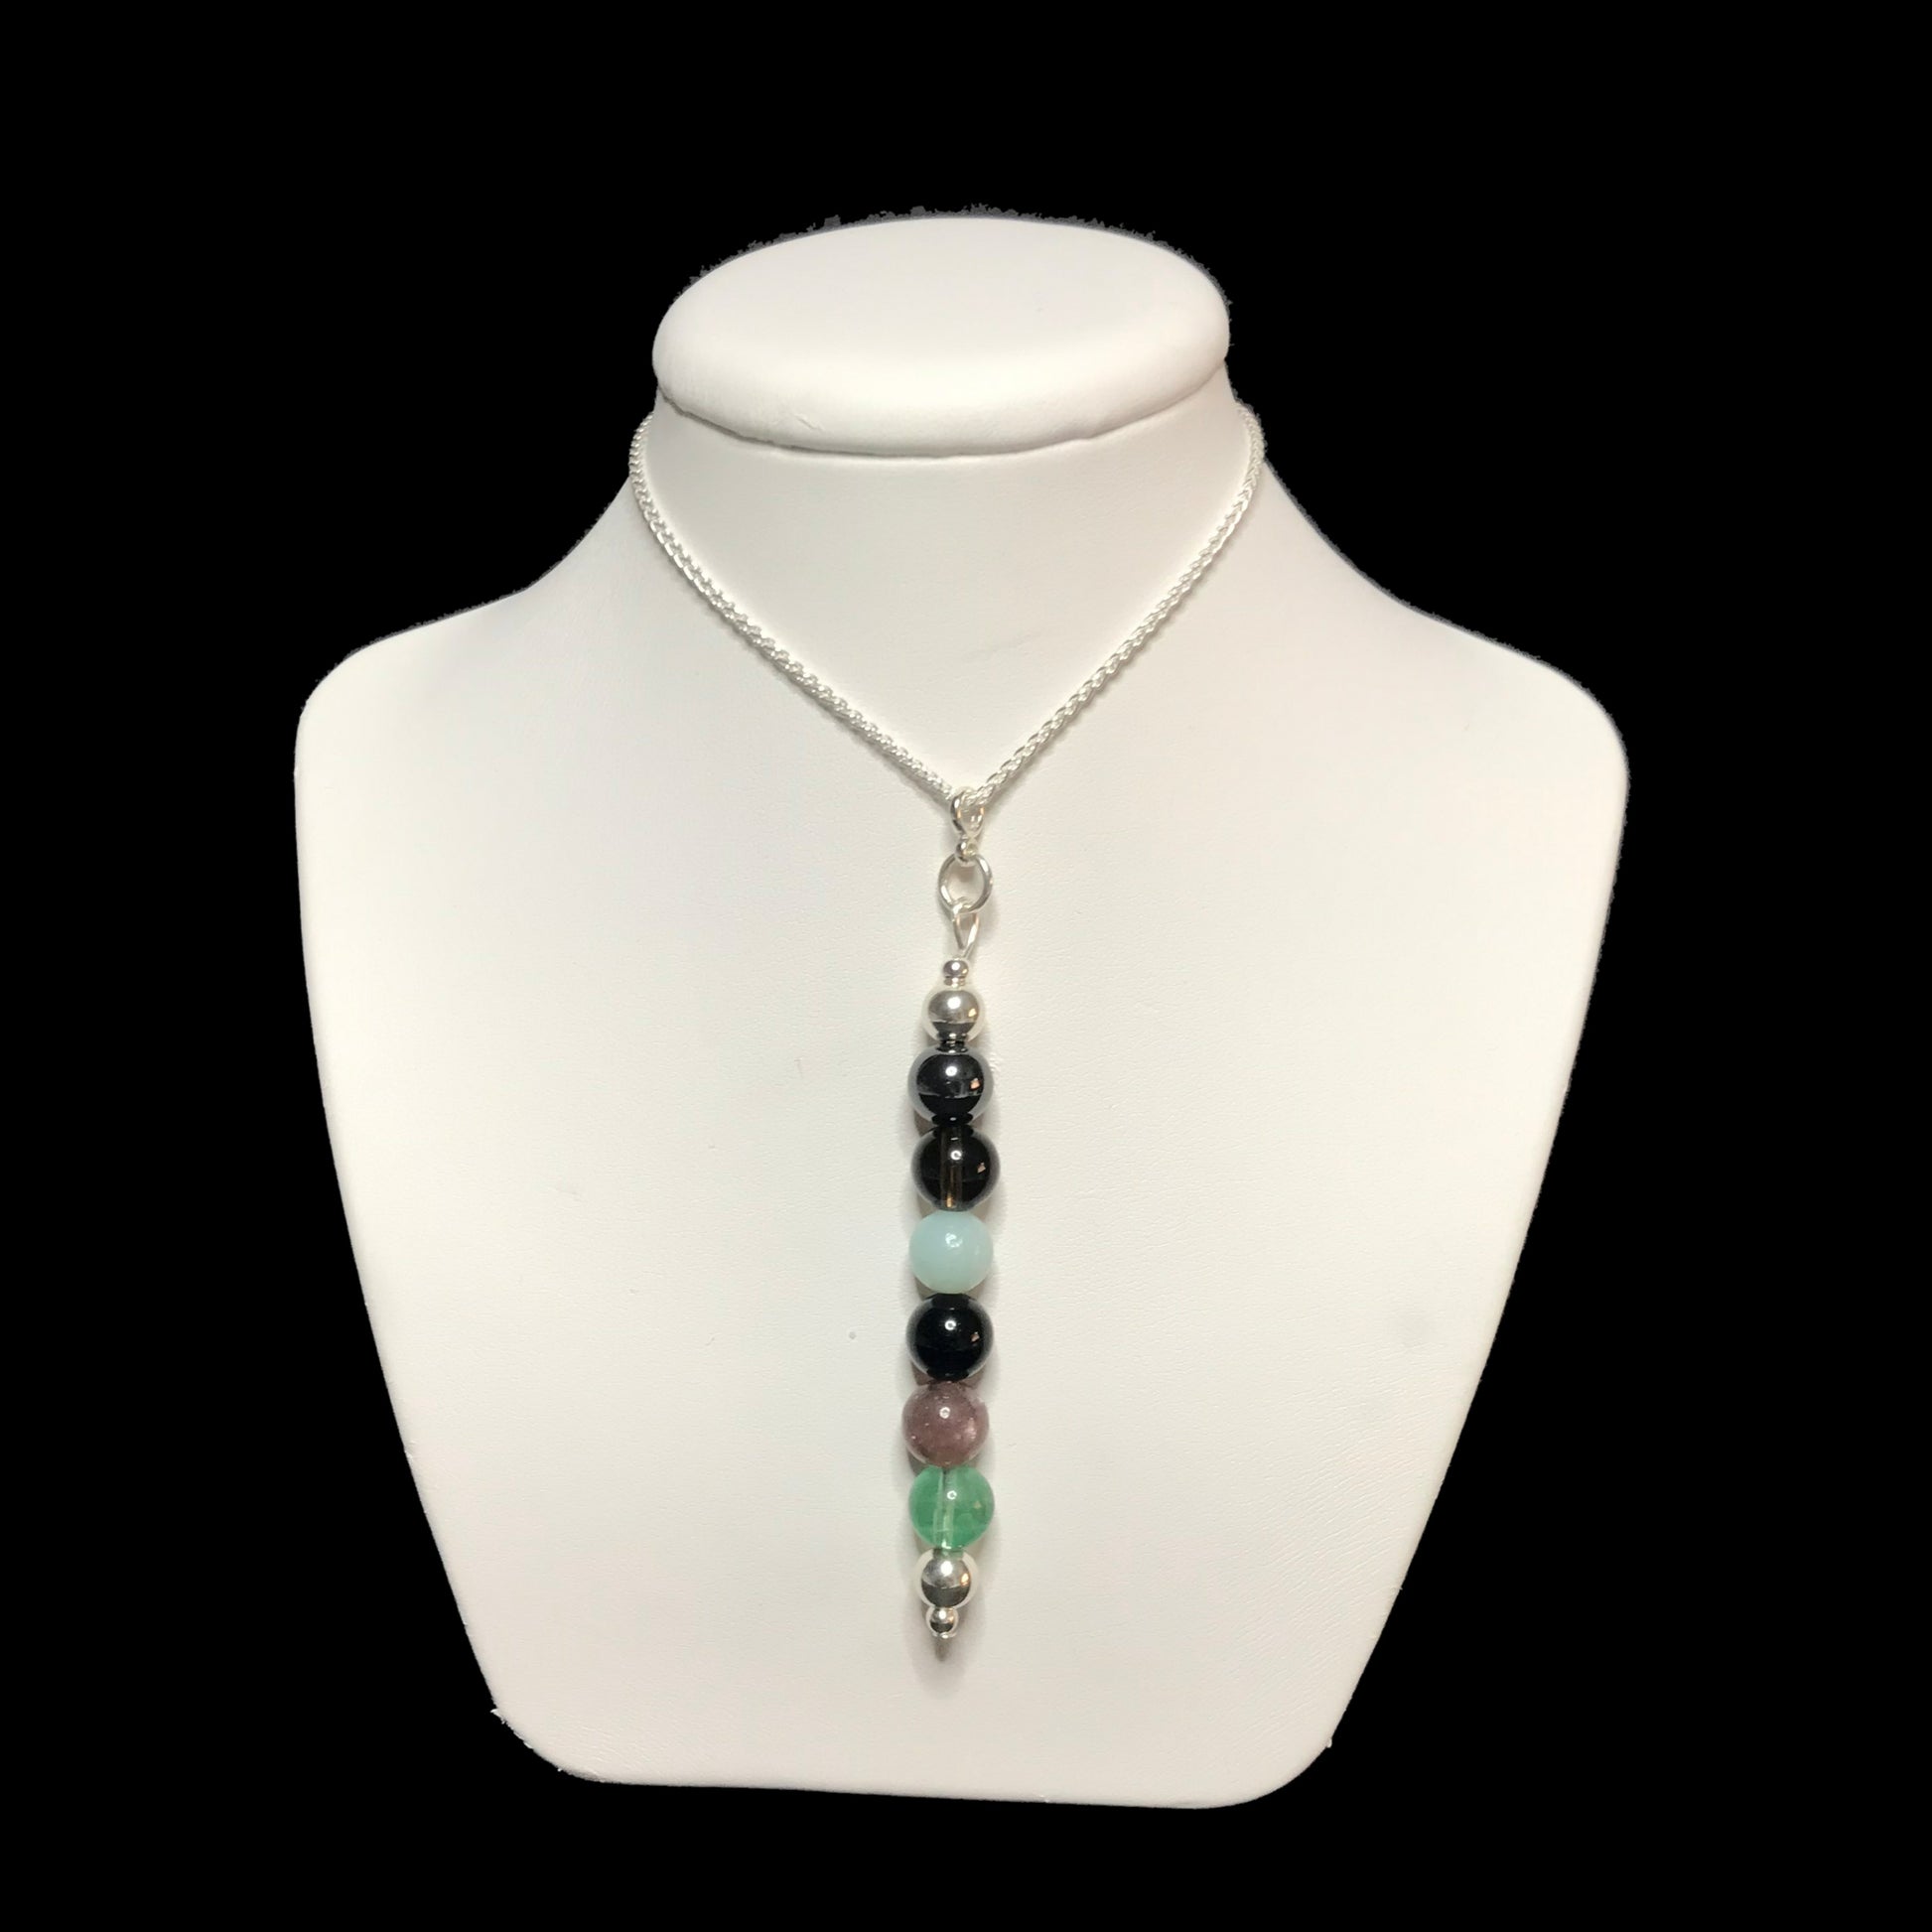 EMF protection crystal pendant necklace on a white stand